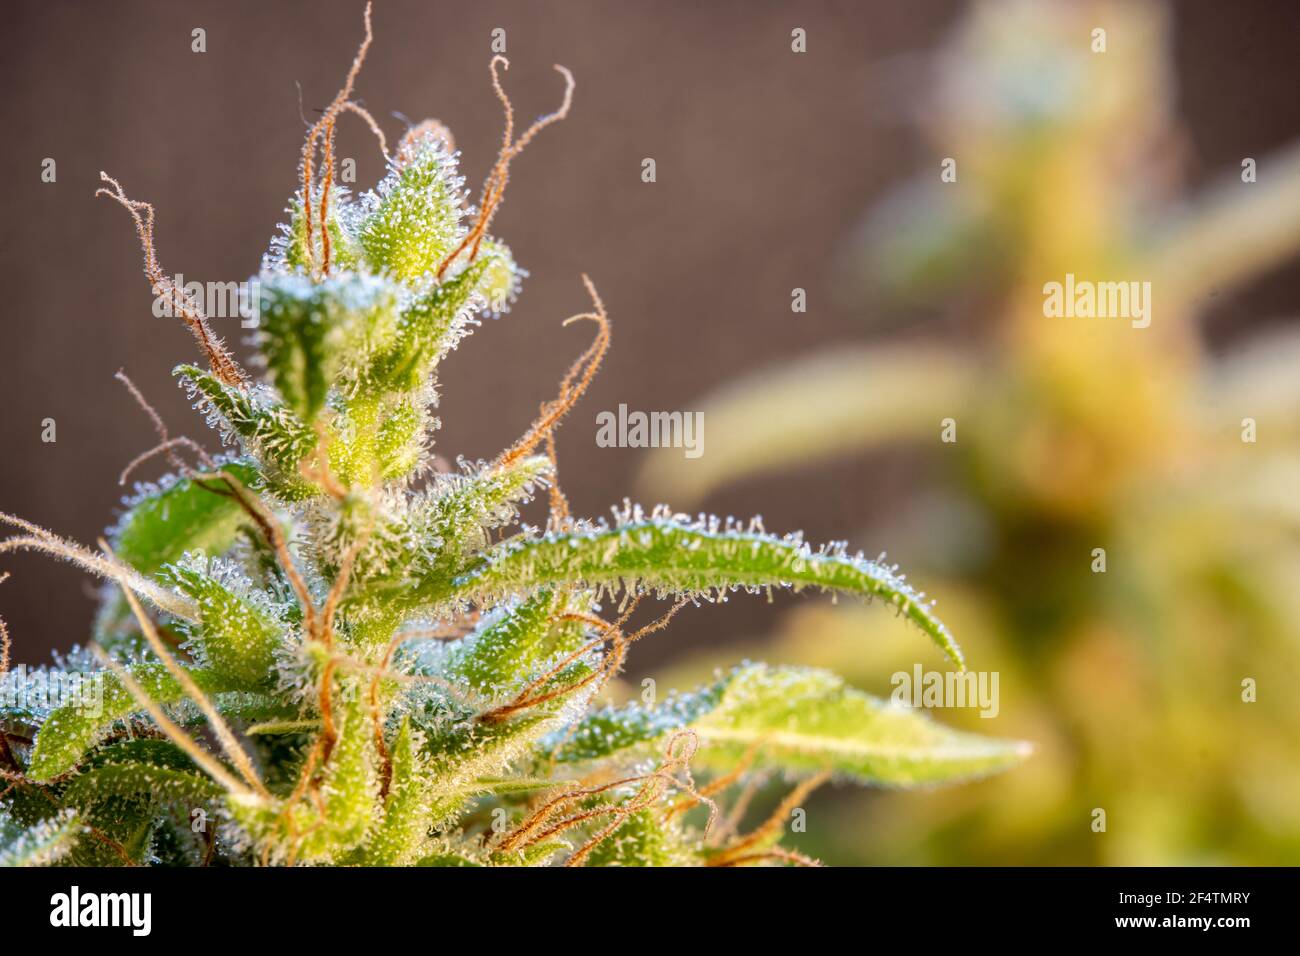 A marijuana plants with leaves covered with resin, close-up view. Stock Photo